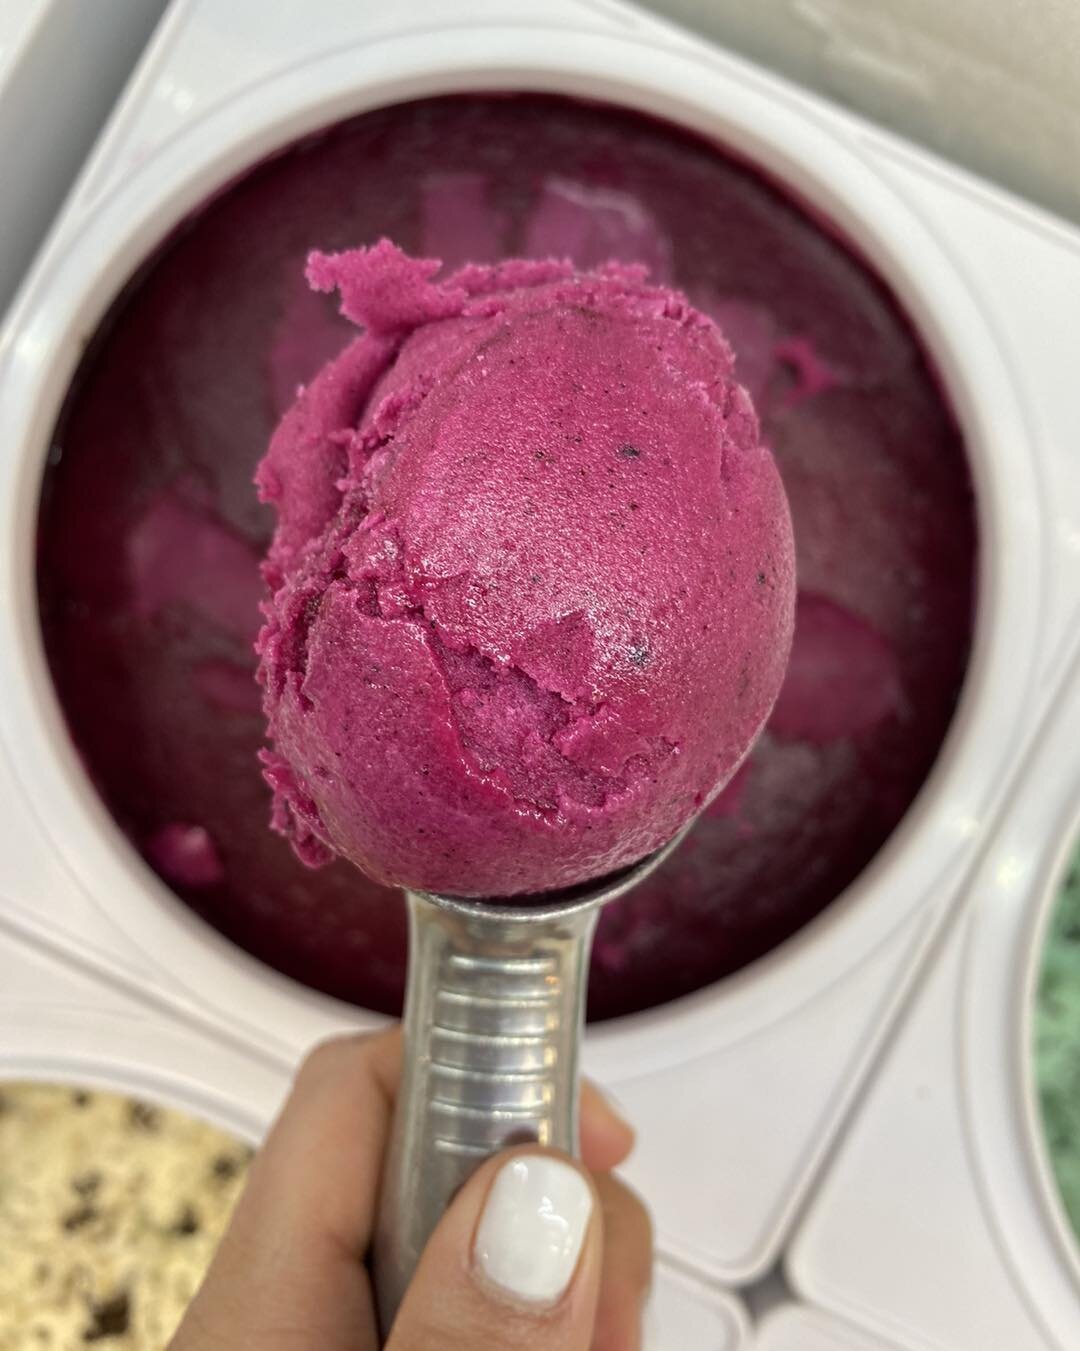 Well one thing&rsquo;s for sure: this sans-dairy Dragonfruit sorbet won&rsquo;t last long&hellip; just 👀 at that color! 

🐉 🛒 😂 It&rsquo;s kinda like the Aldi Finds aisle. It&rsquo;s here today, gone tomorrow&hellip; and we can&rsquo;t really tel